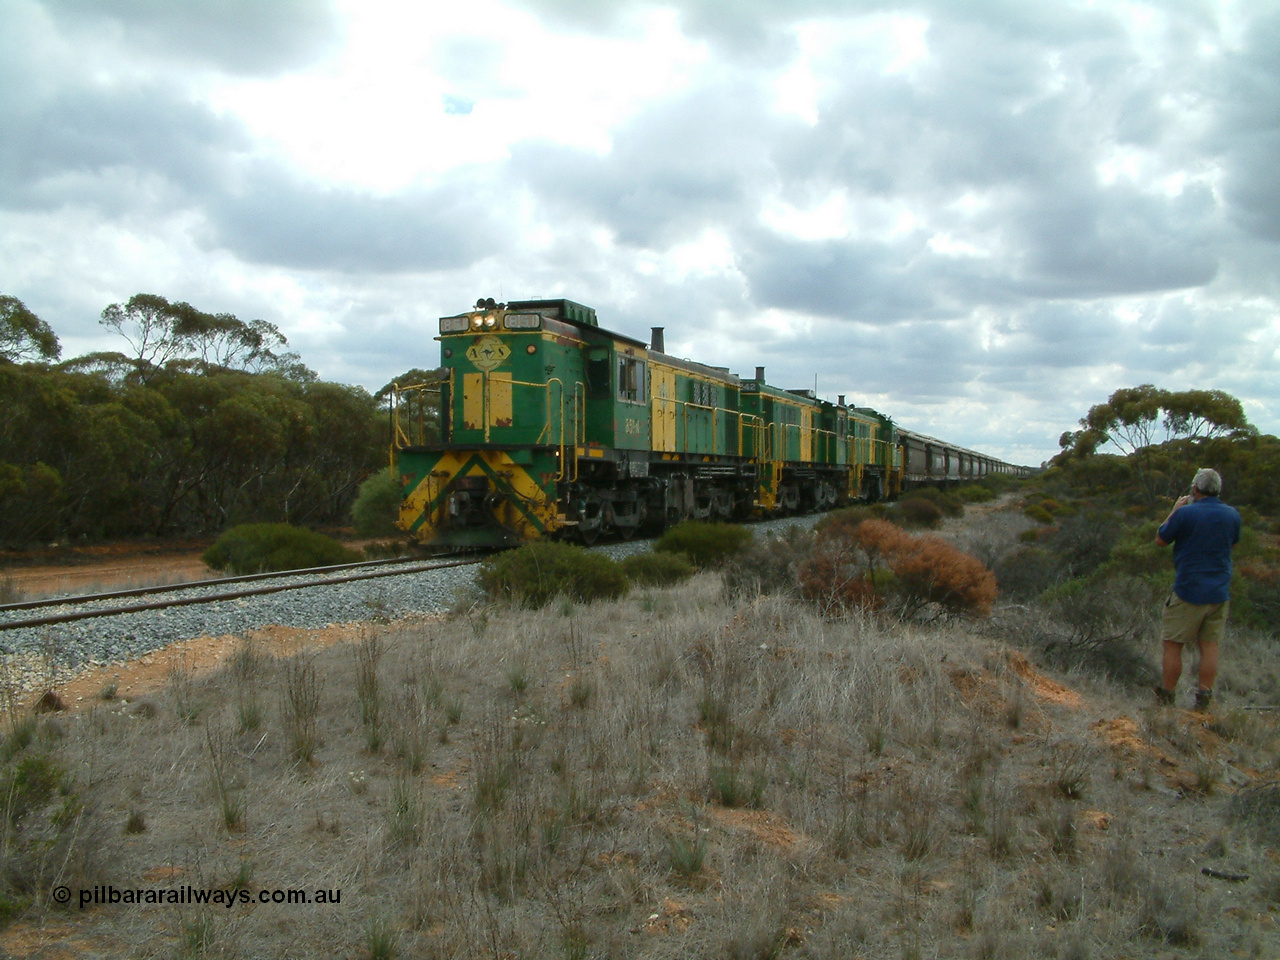 030409 120804
Kielpa, a few kilometres south of the former Konanda siding loaded grain train with 830 class unit 851 AE Goodwin ALCo model DL531 serial 84137, 851 has spent its entire operating career on the Eyre Peninsula, leads fellow 830 class 842 serial 84140 and a rebuilt unit DA 4, rebuilt from 830 class unit 839 by Port Augusta Workshops, retains original serial 83730 and model DL531 with the first twelve waggons behind the locos XNW type slows to a stop for a crew change.
Keywords: 830-class;851;84137;AE-Goodwin;ALCo;DL531;